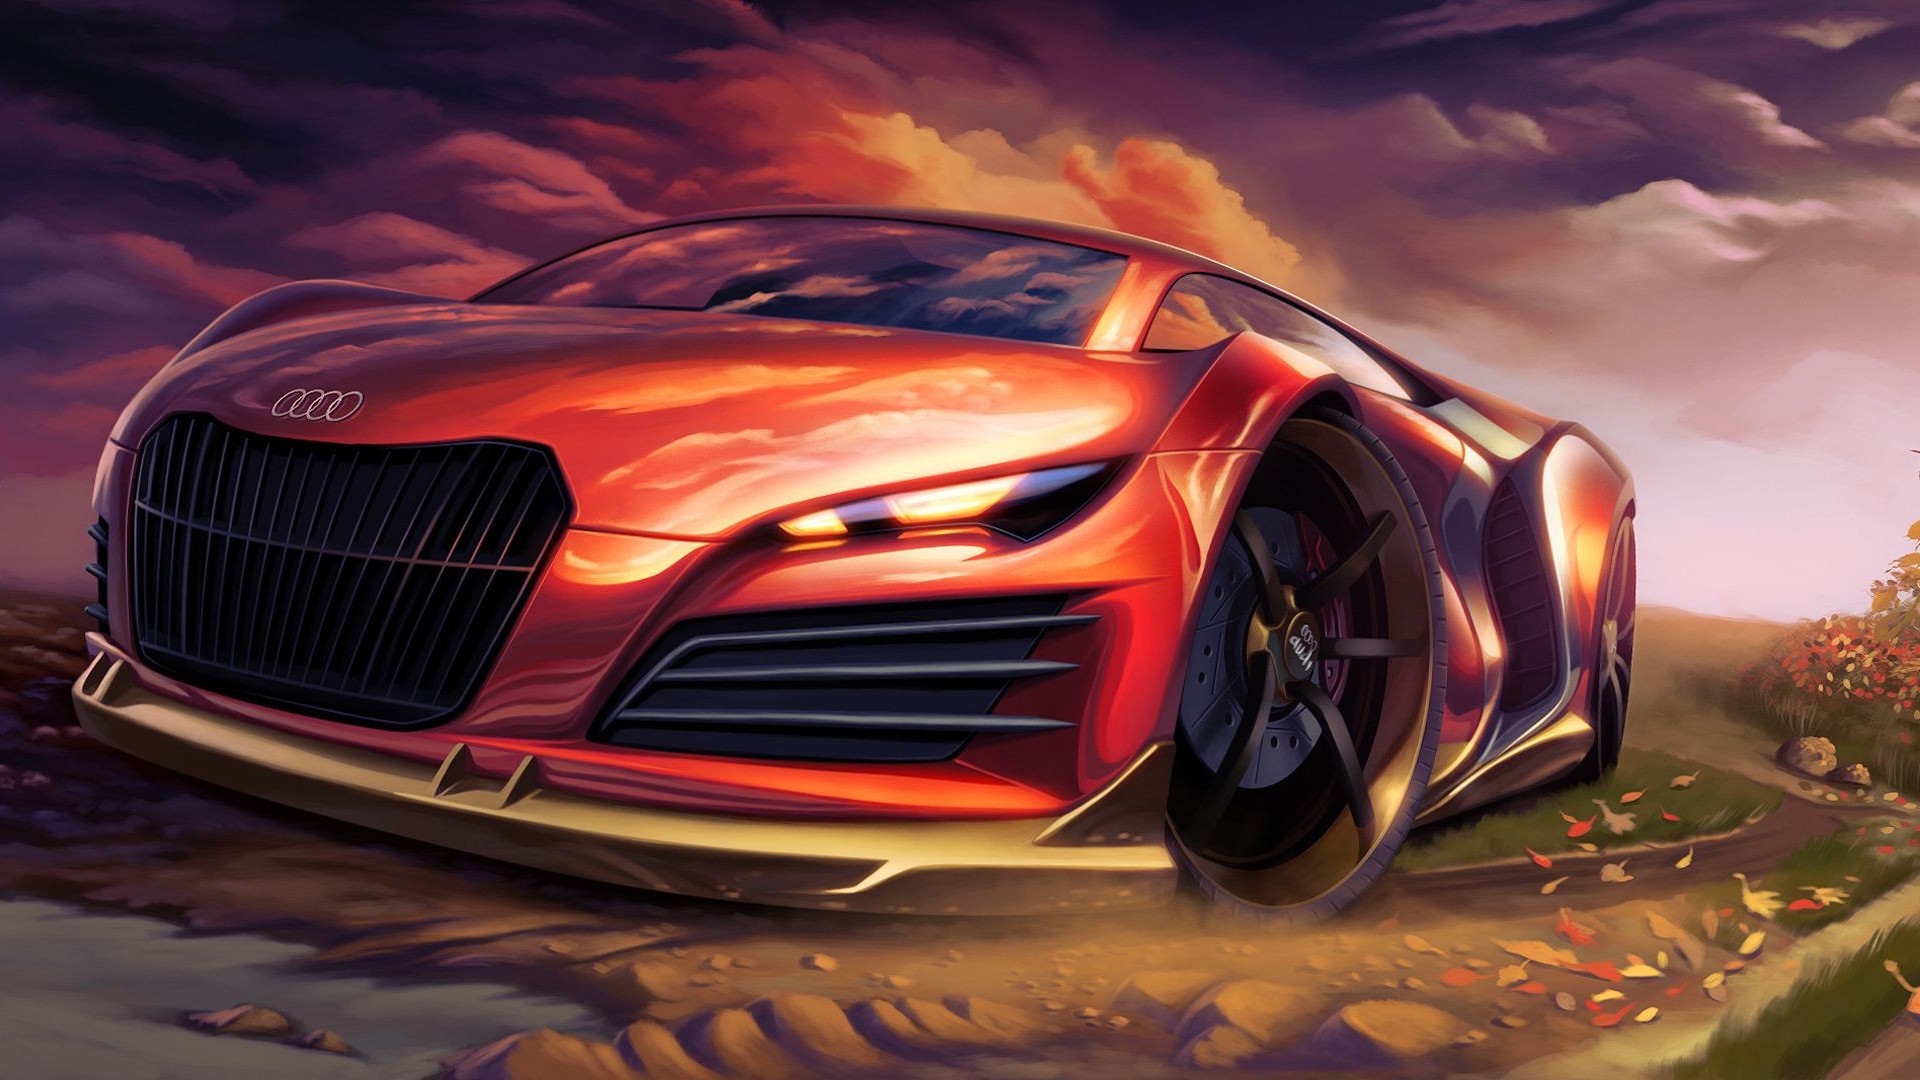 General 1920x1080 car sports car concept cars digital art painting Audi nature clouds leaves road vehicle DeviantArt red cars